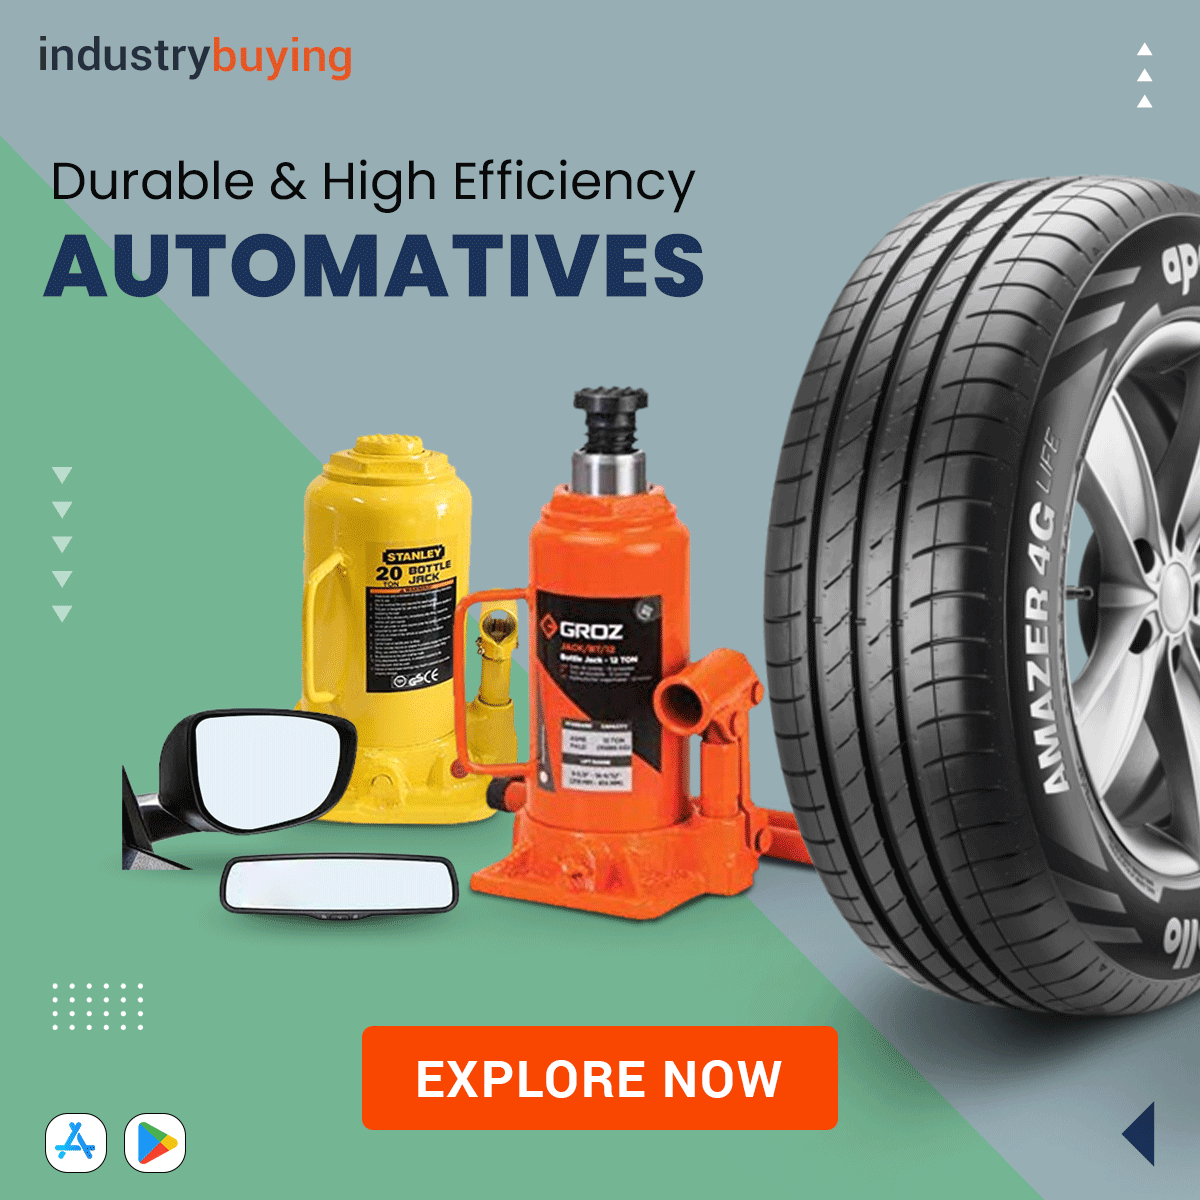 🚚Upgrade Your Fleet with Top-Quality Automotive Parts! Explore now on Industrybuying-> bit.ly/3oZL7CZ 💯

#AutomotiveSupplies #autopartsstore #autopartswholesaler #autopartsforsale #autopartssupplier #autopartsshop #vehicleparts #vehicleaccessories #autoparts #b2b